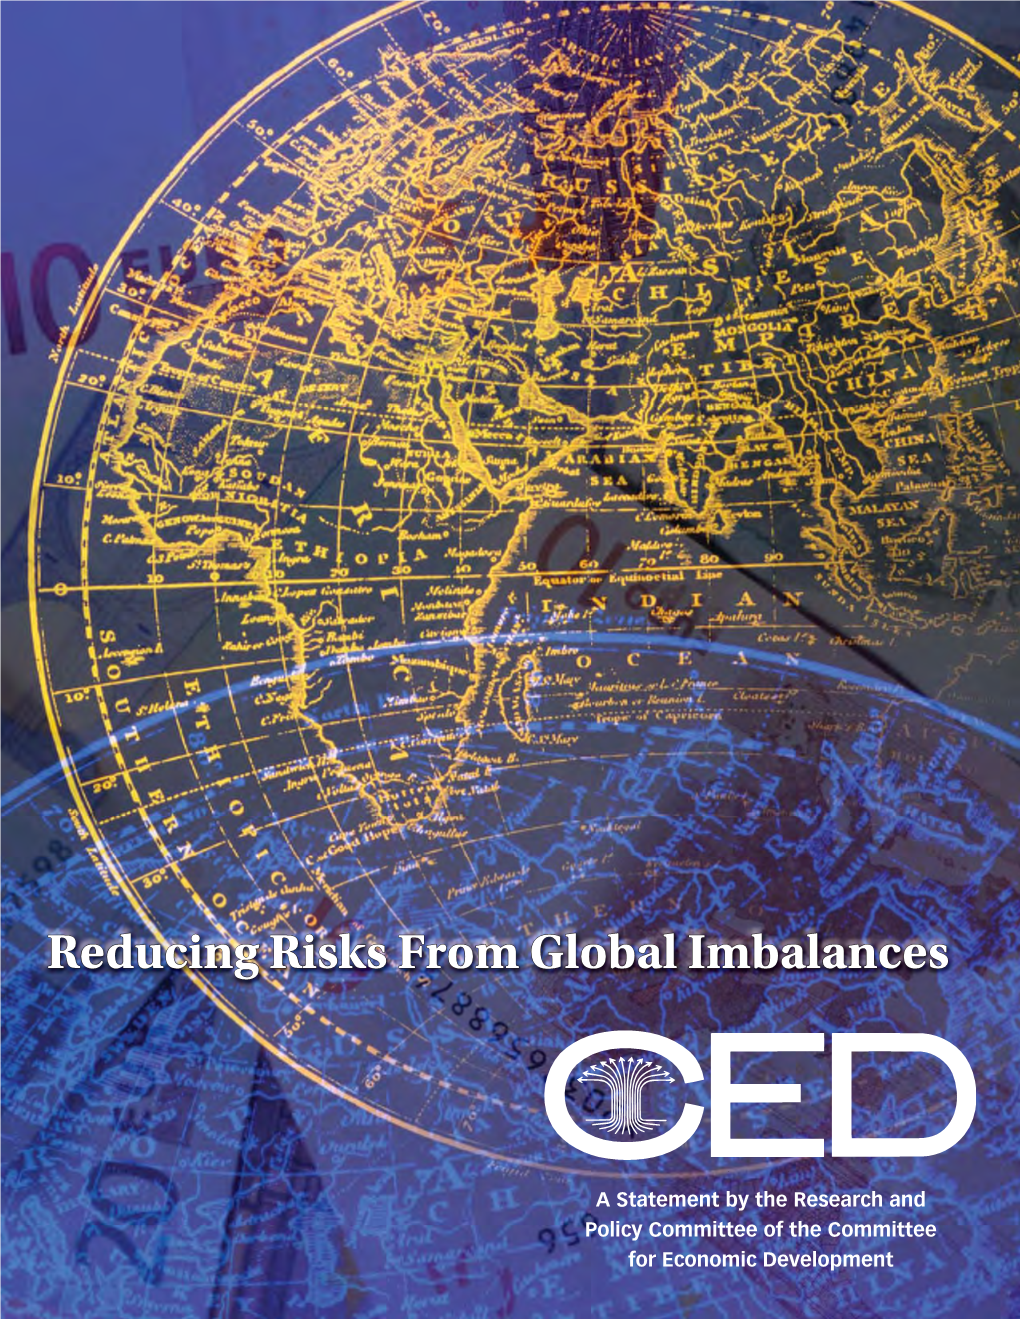 Reducing Risks from Global Imbalances Committee for Economic Development